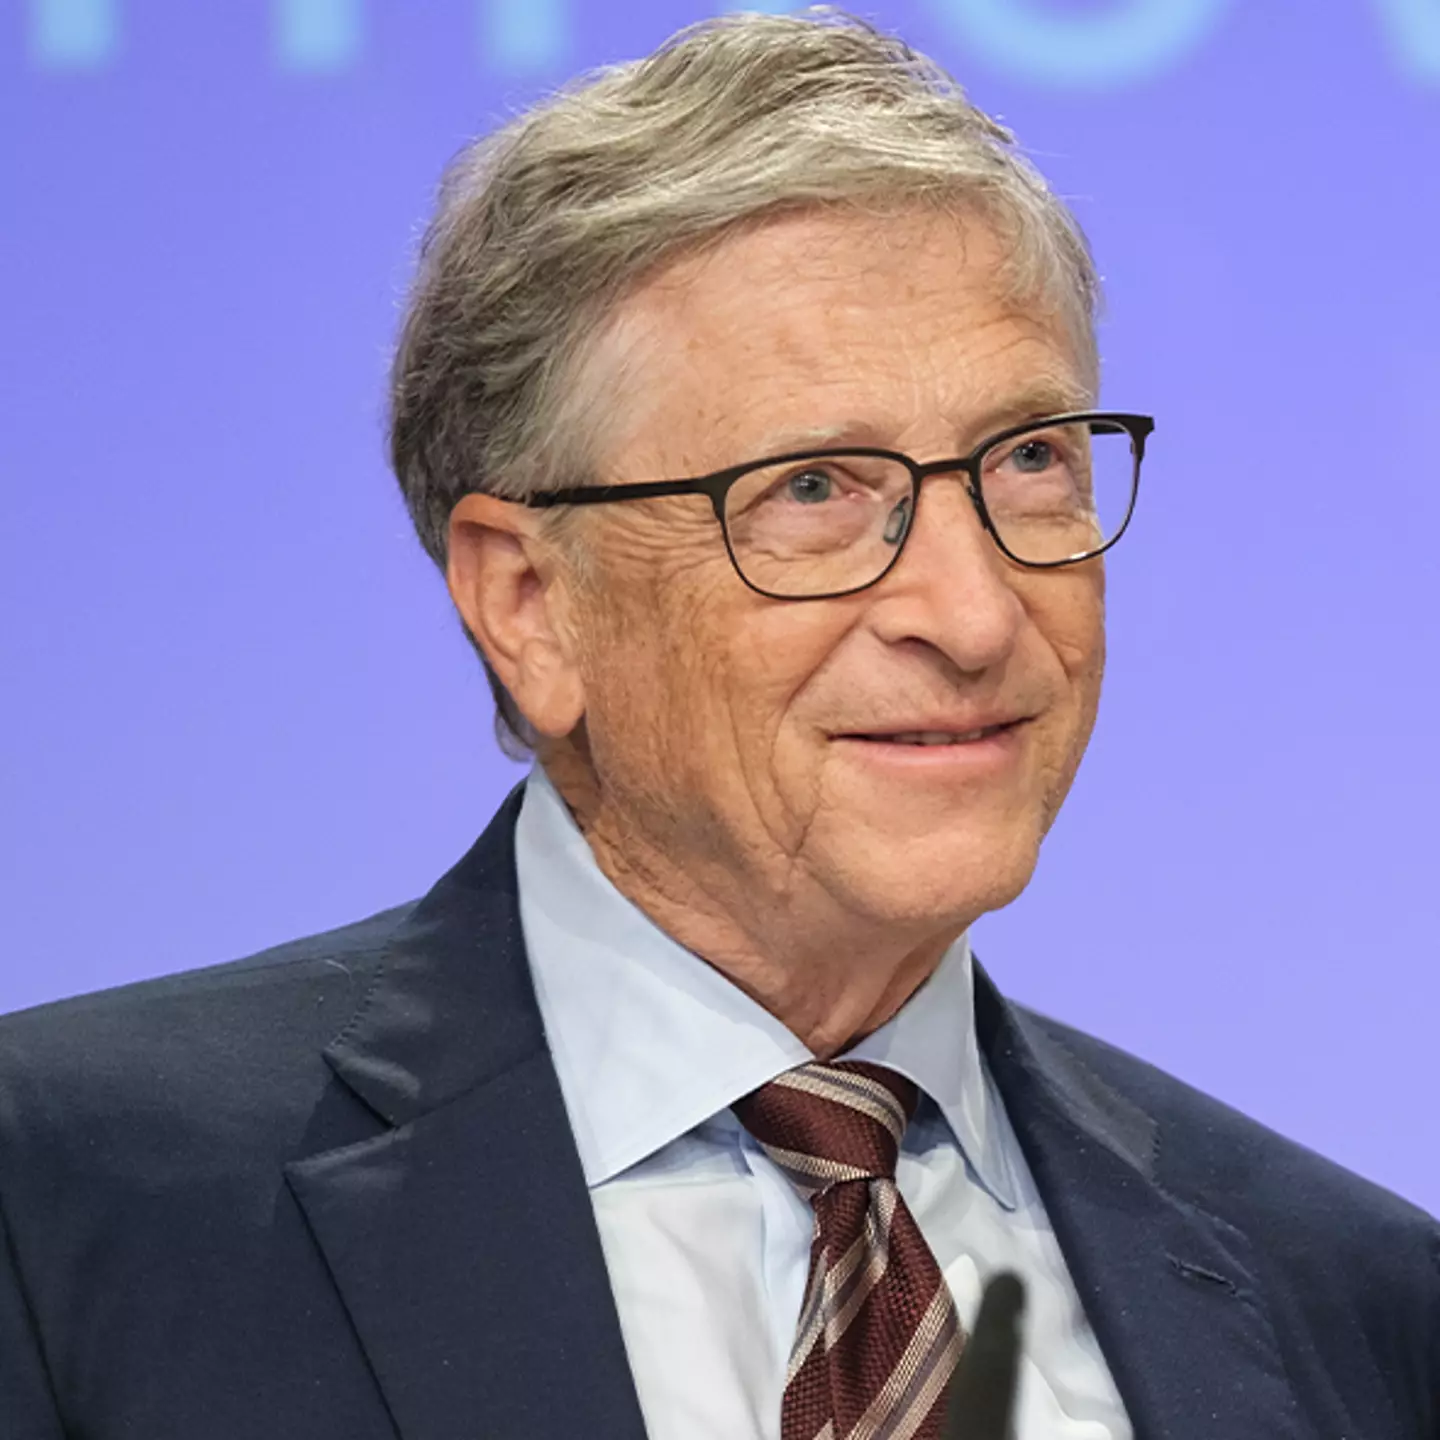 Bill Gates reveals ‘laughable’ conspiracy theory that people confront him about in public